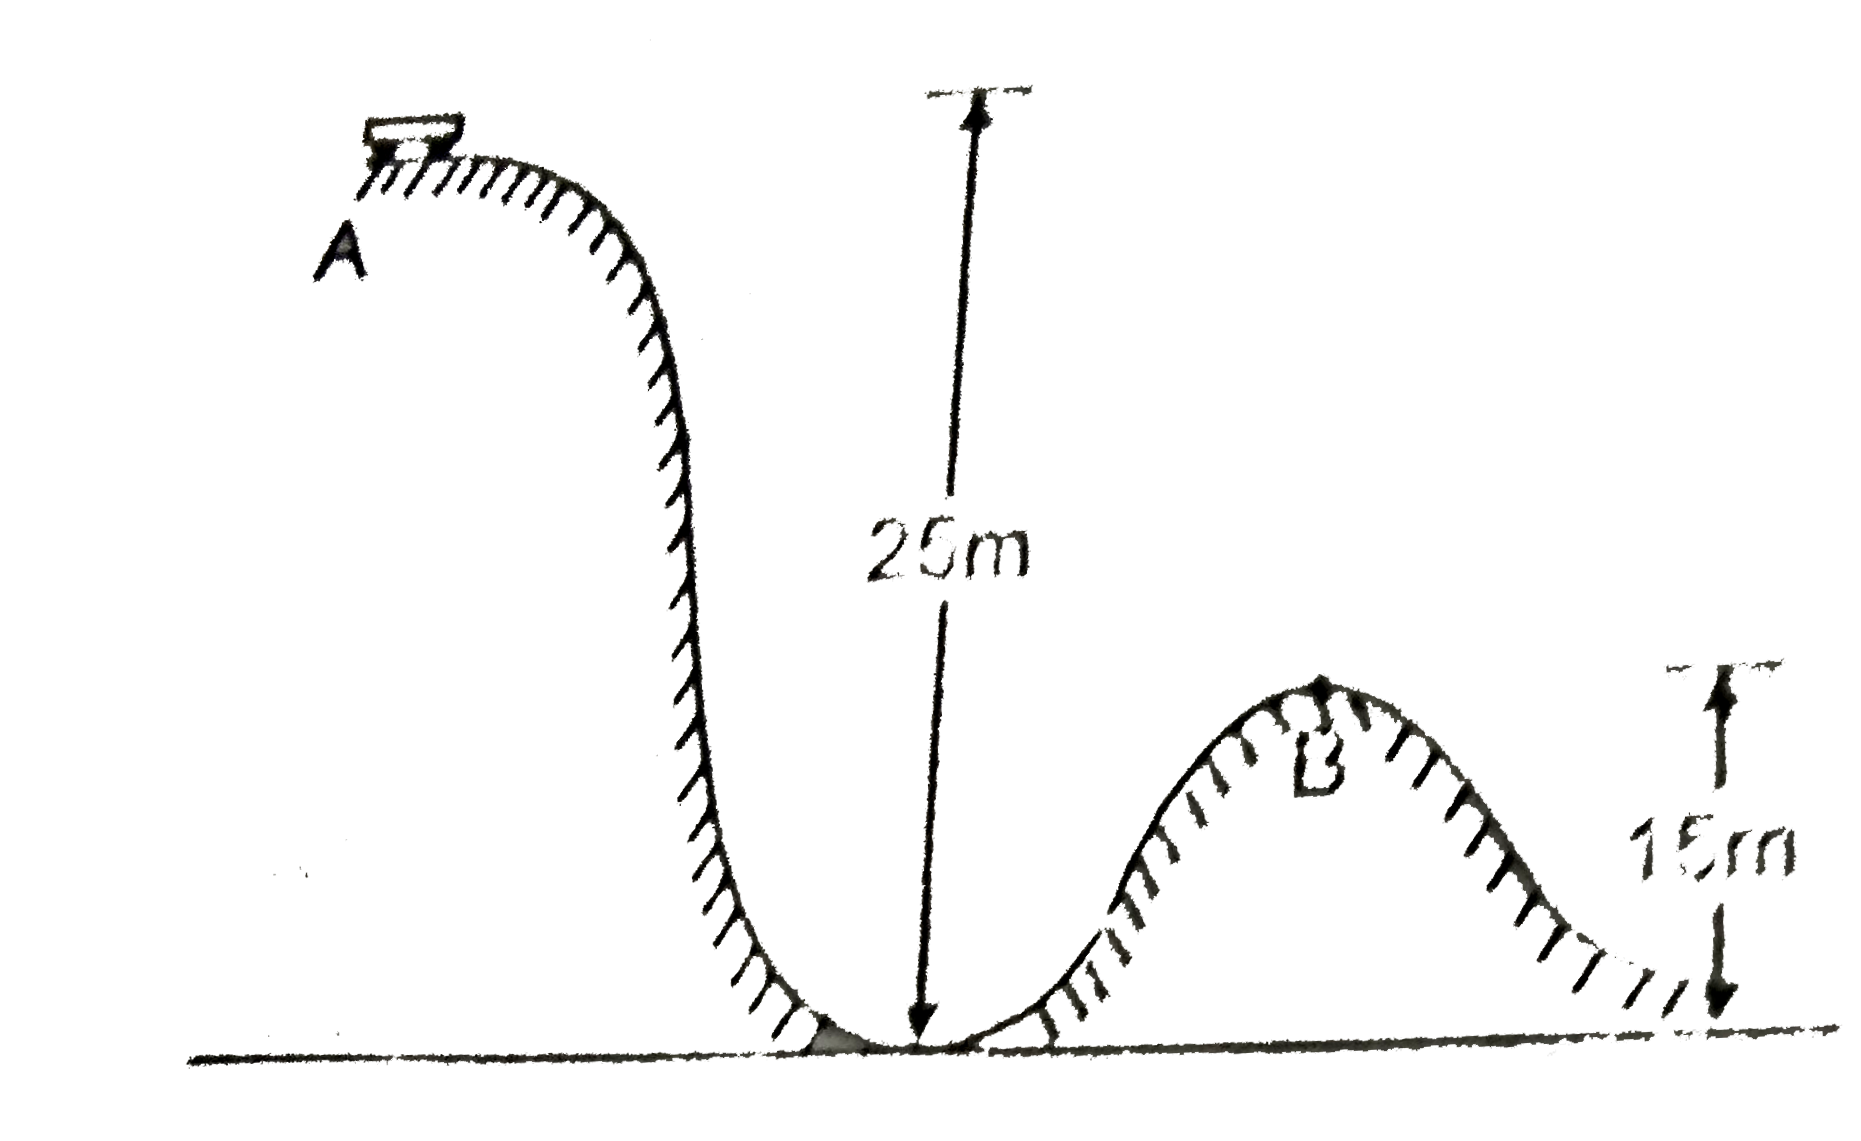 Figure shows the roller coaster track. Each car will start from rest at point A and will roll with negligible friciton. It is important that there should be at least some small positive normal force exerted by the track on the car at all points, otherwise the car would leave the track. With the above fact, the minimum safe value for the radius of curvature at point B is (g=10m//s^(2) :